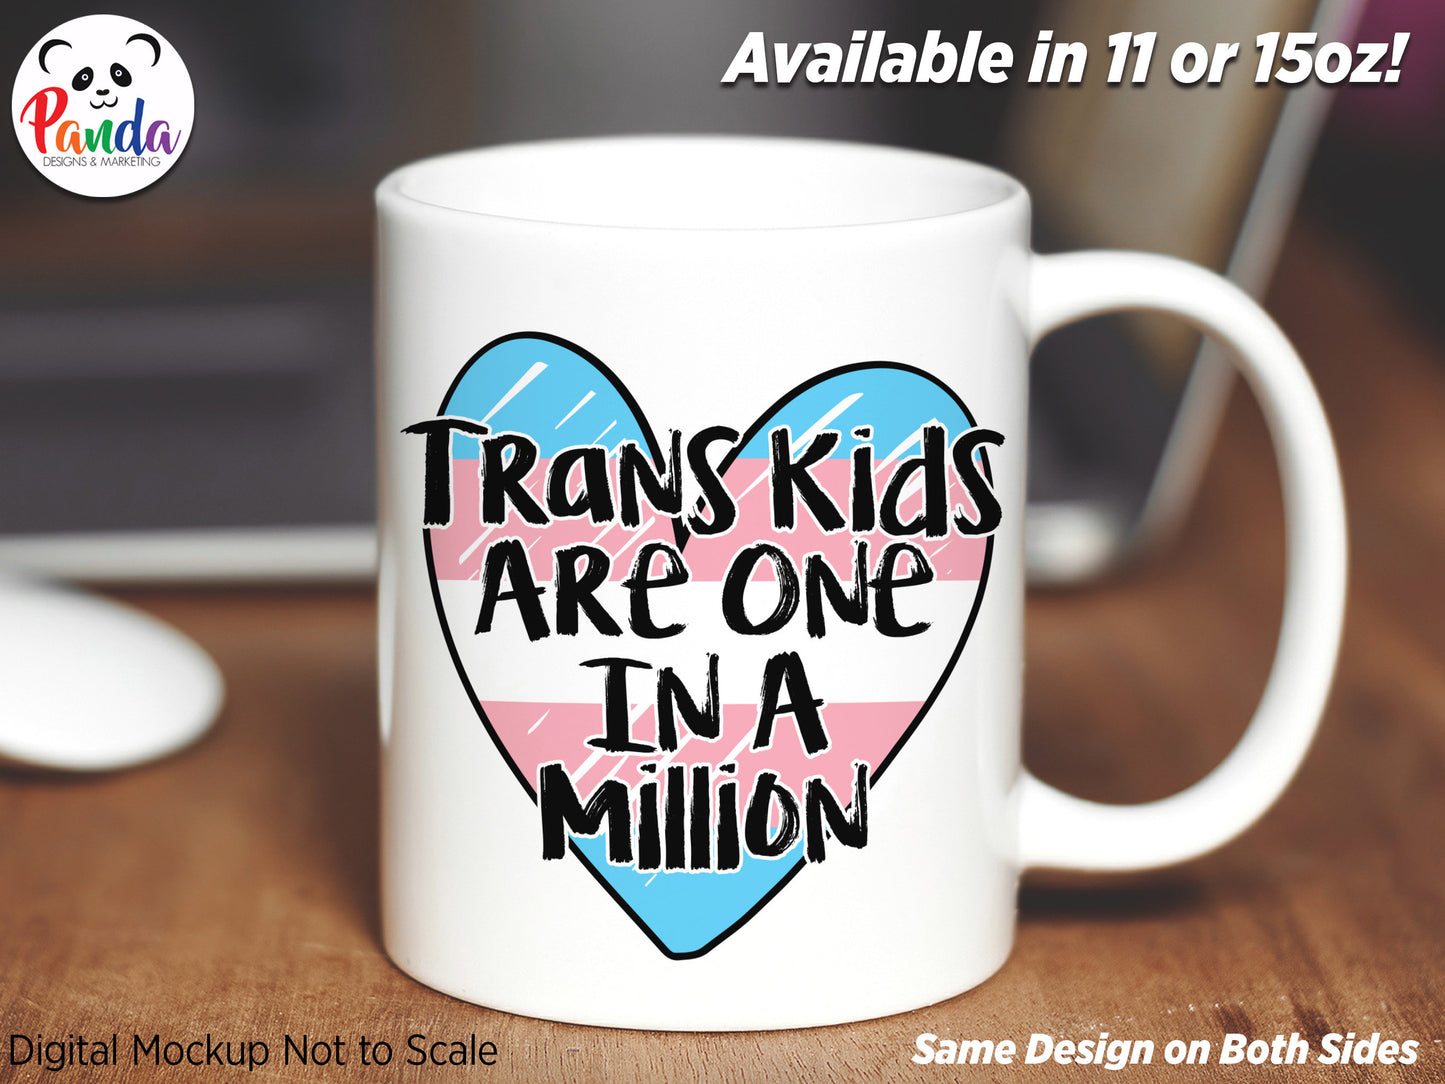 Trans Kids are One in a Million Mug. Transgender Rights coffee or tea cup. 2 Sizes sublimated full color.  Portion of proceeds donated.